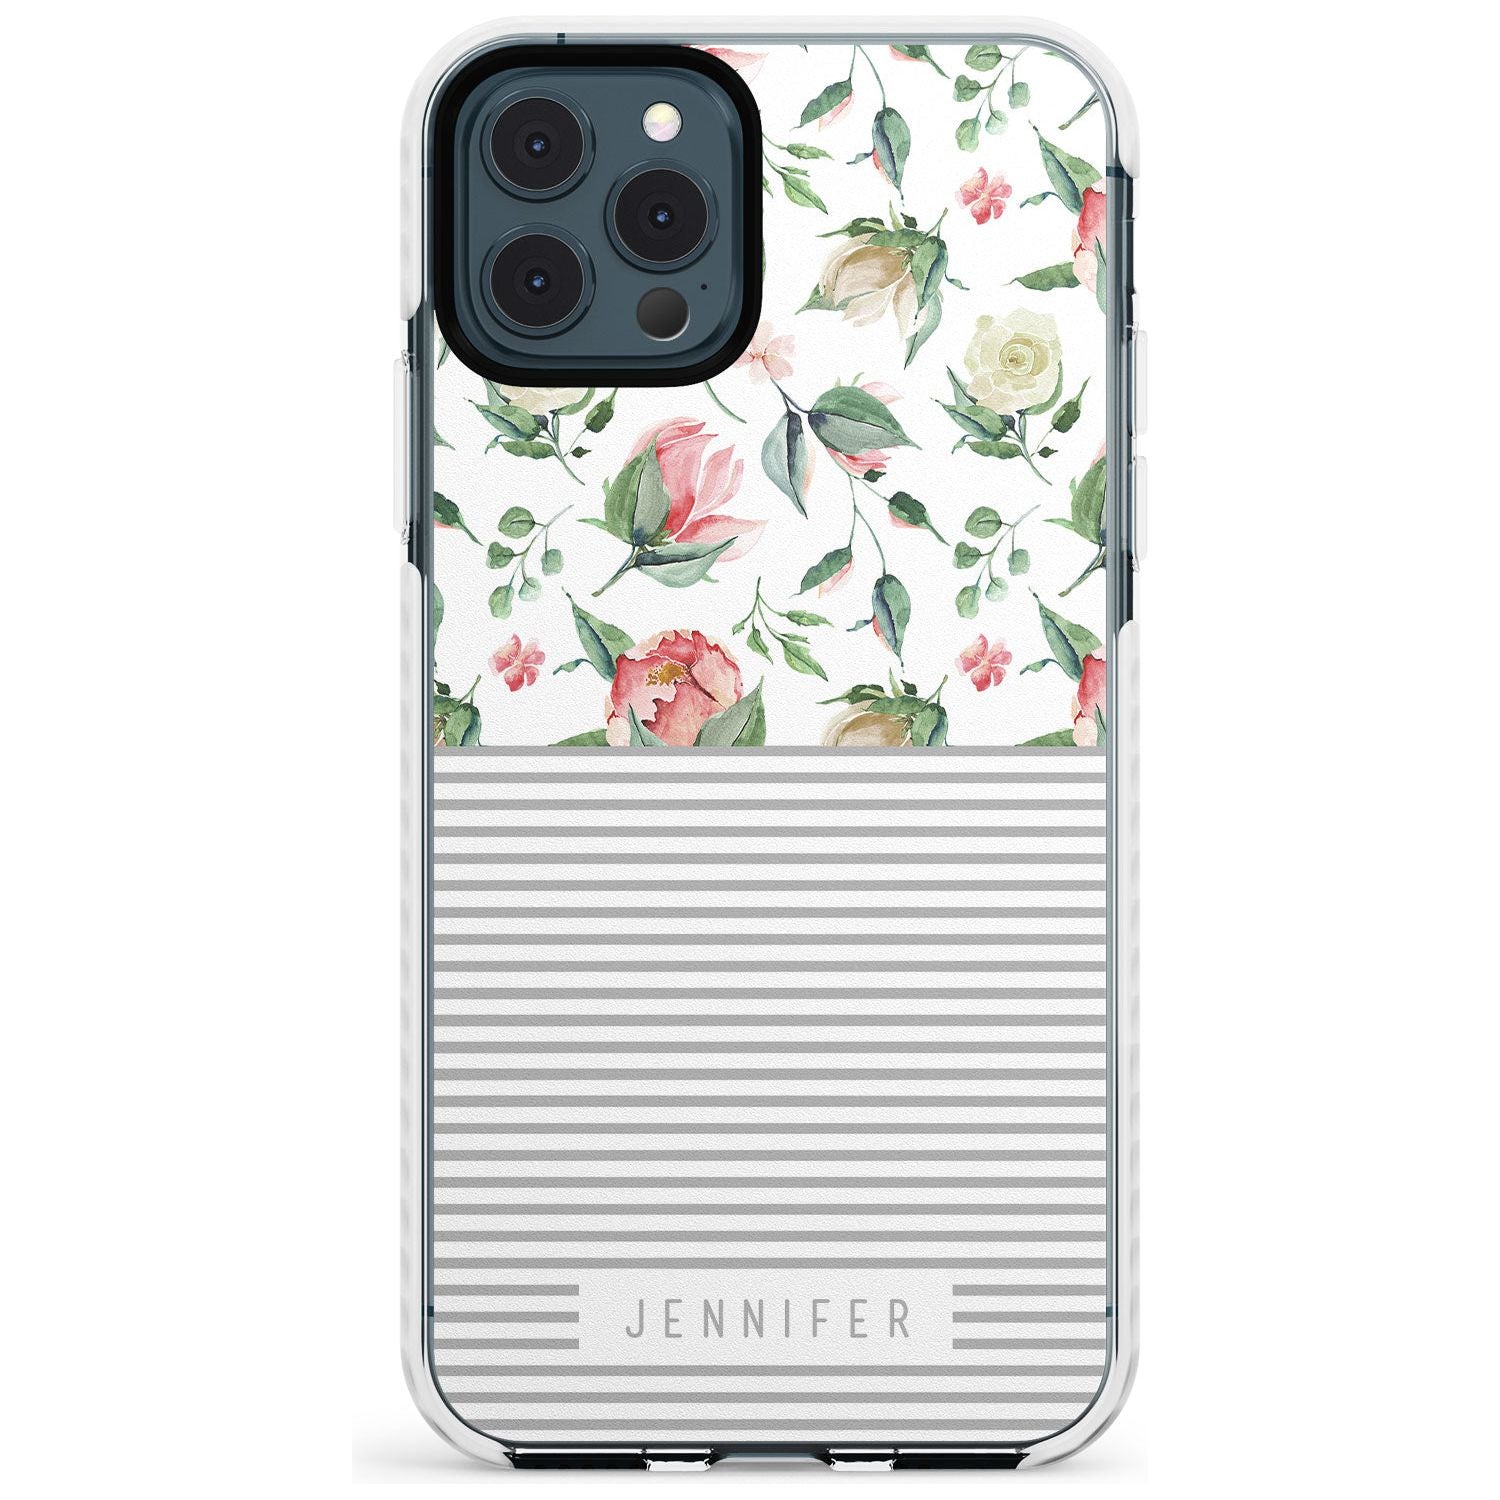 Light Floral Pattern & Stripes Slim TPU Phone Case for iPhone 11 Pro Max